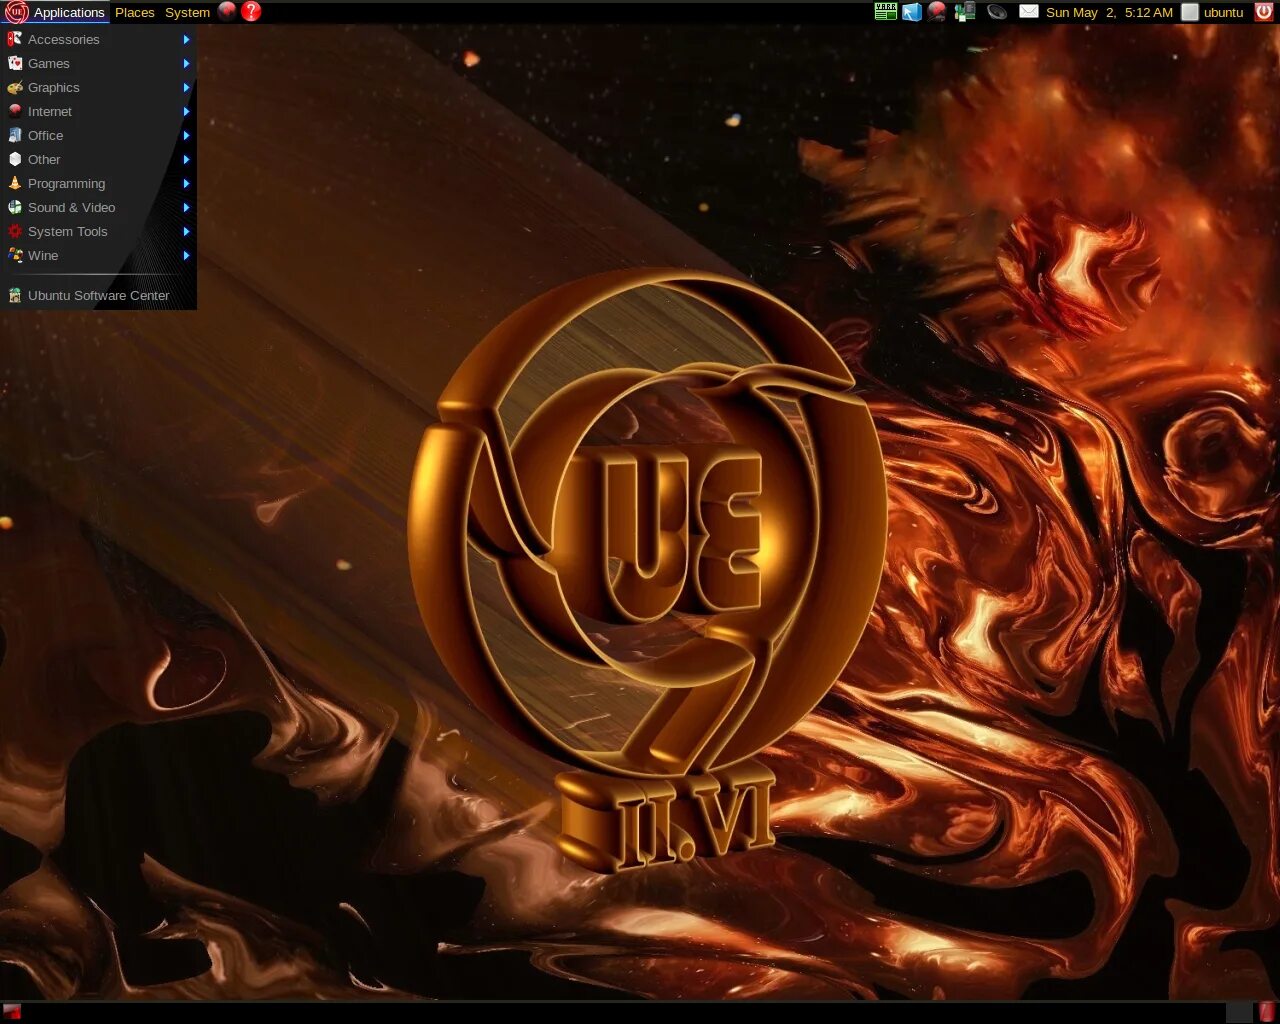 Vi edition. Ultimate Edition Linux. Ultimate Edition. Ubuntu Ultimate Edition. Linux Ultimate Edition Gold icons.